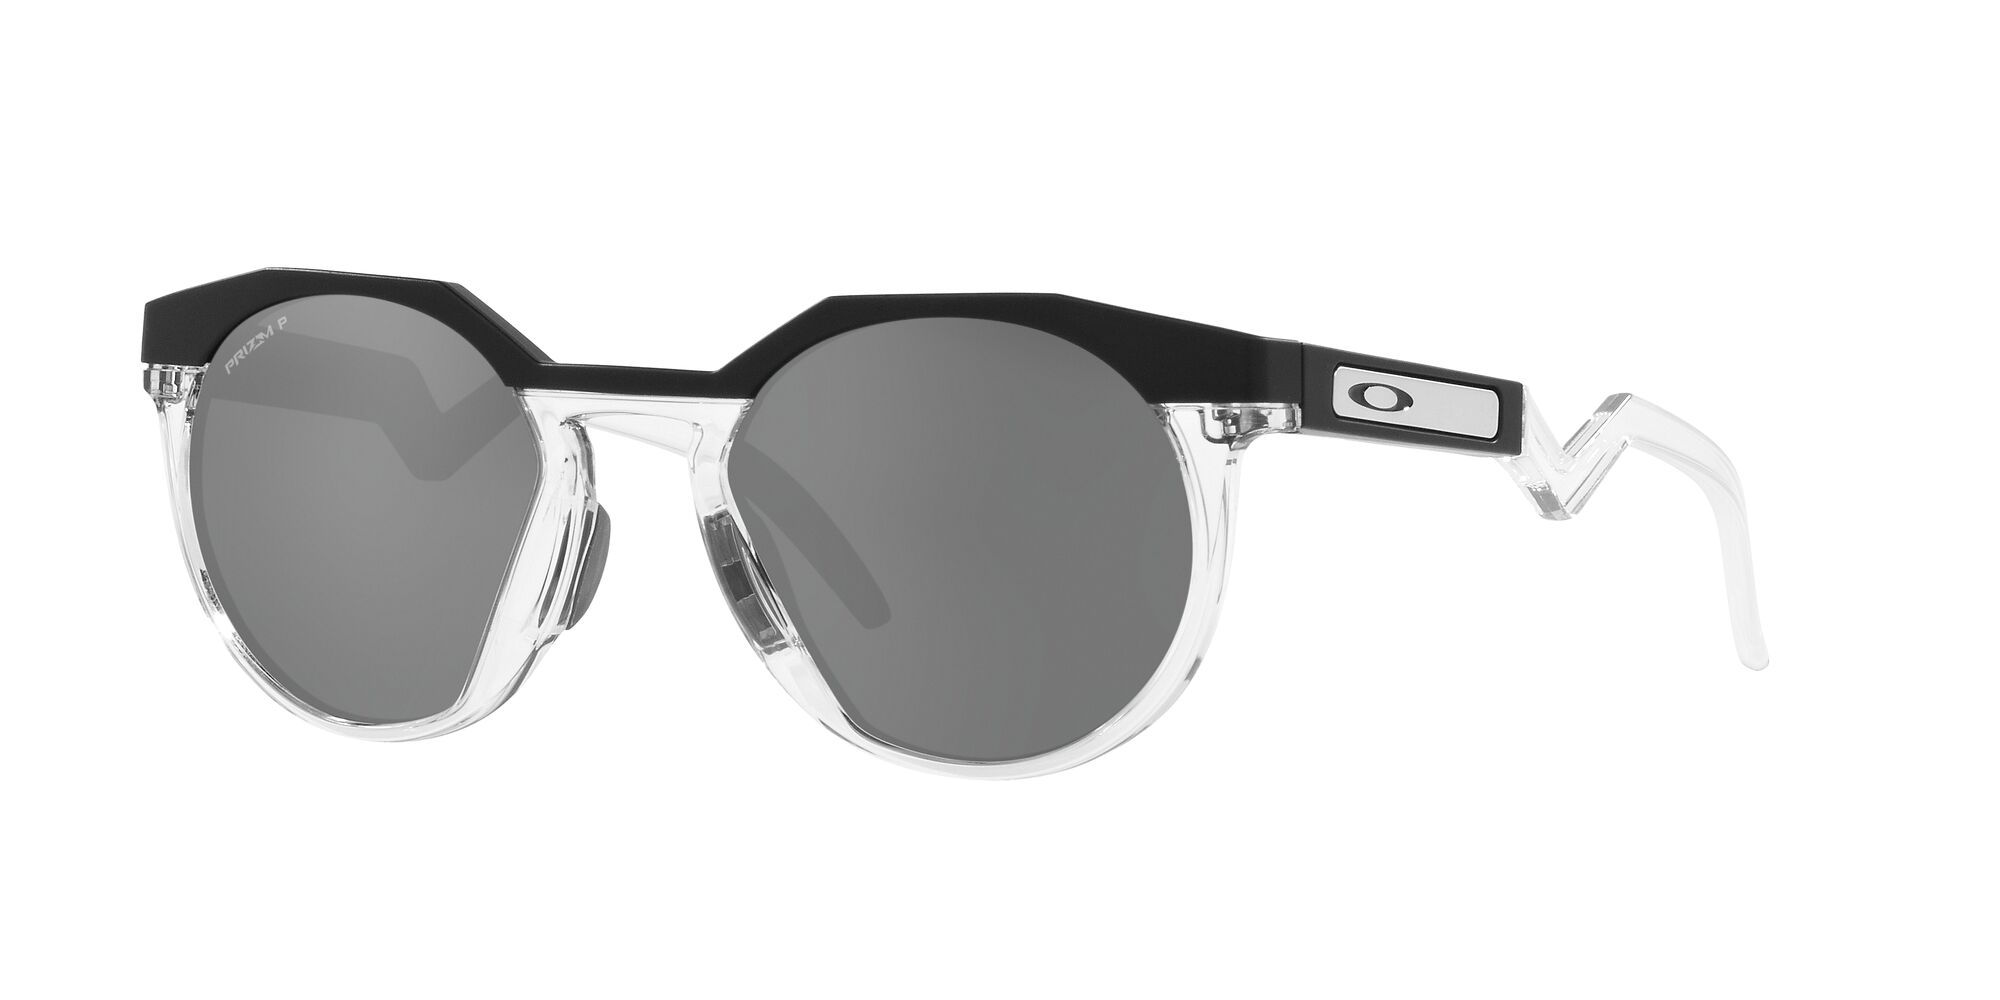 Sunglass South Africa Online Store Products Oakley